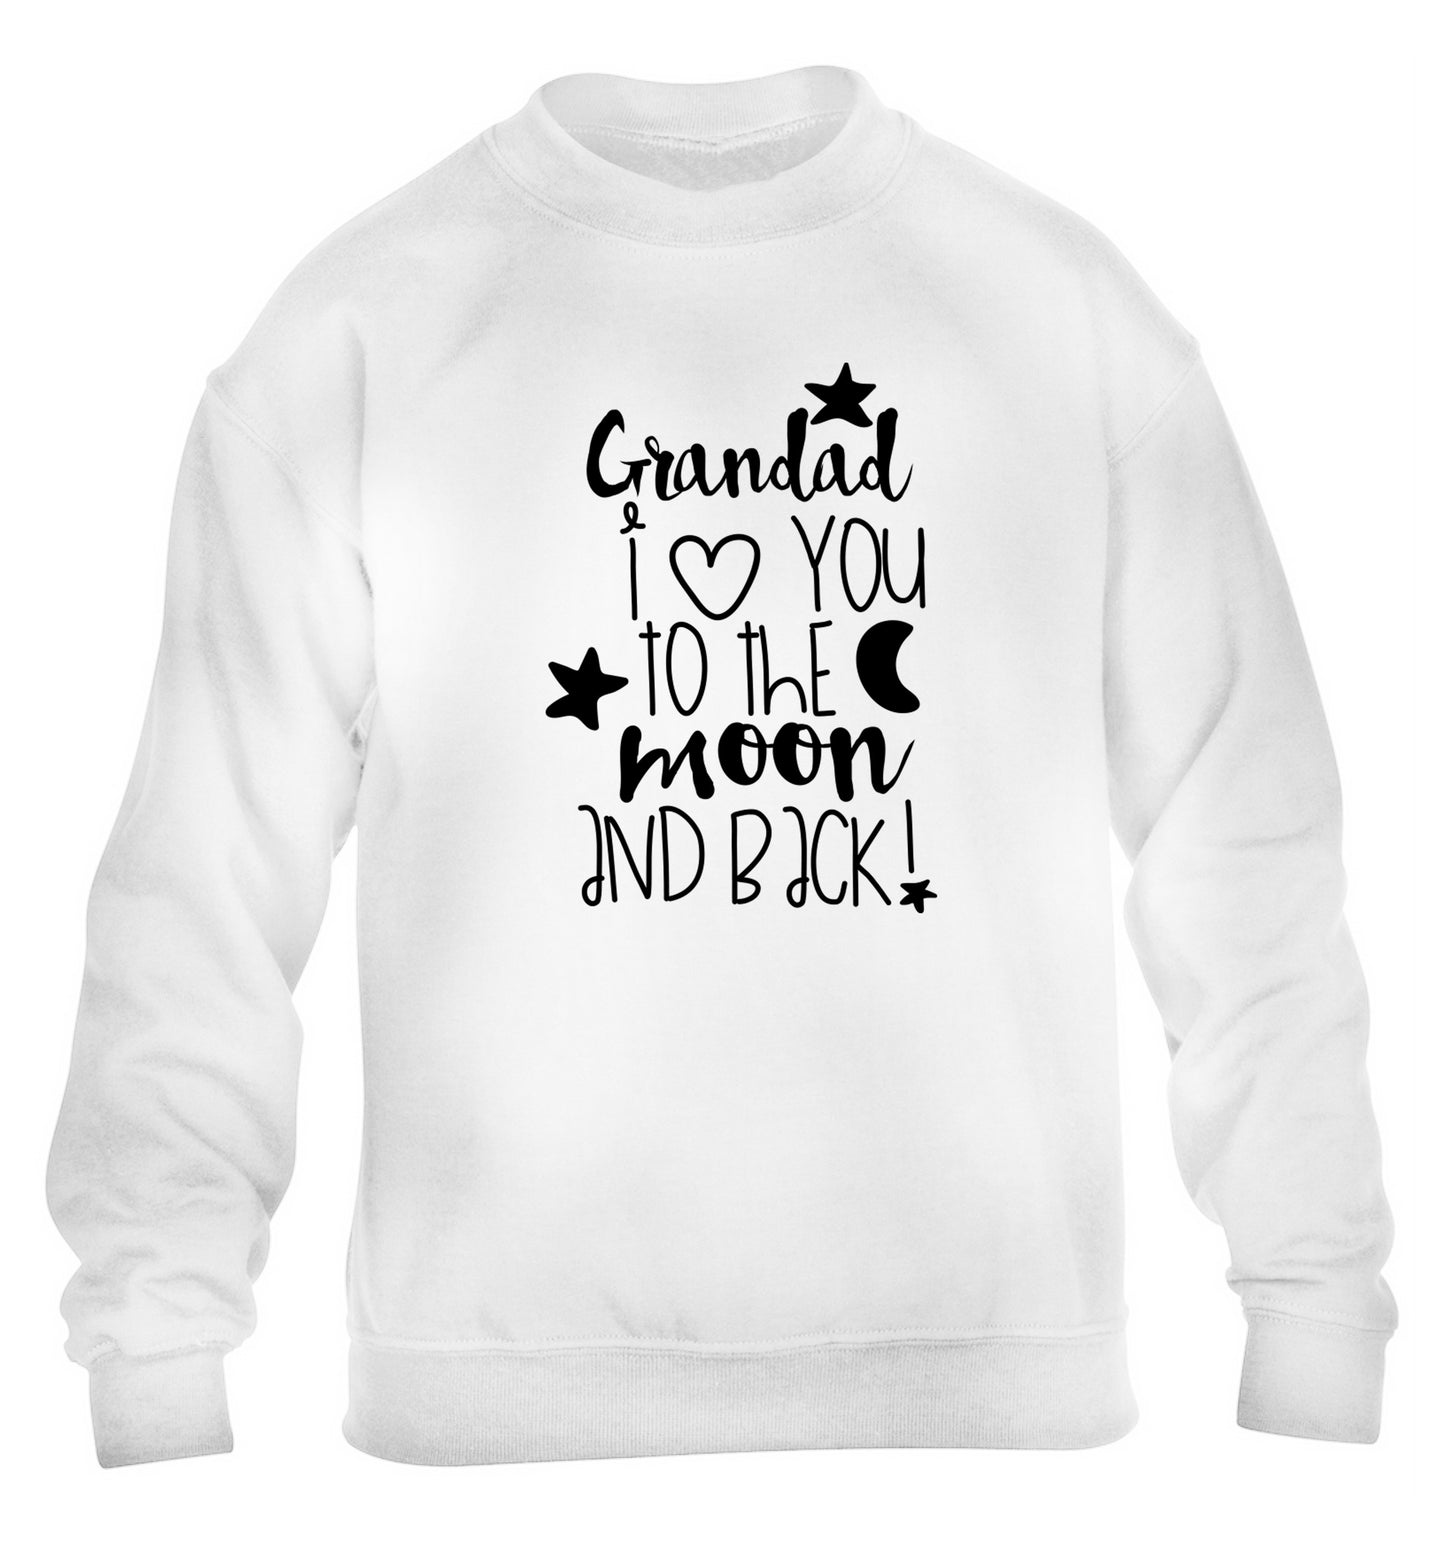 Grandad's I love you to the moon and back children's white  sweater 12-14 Years